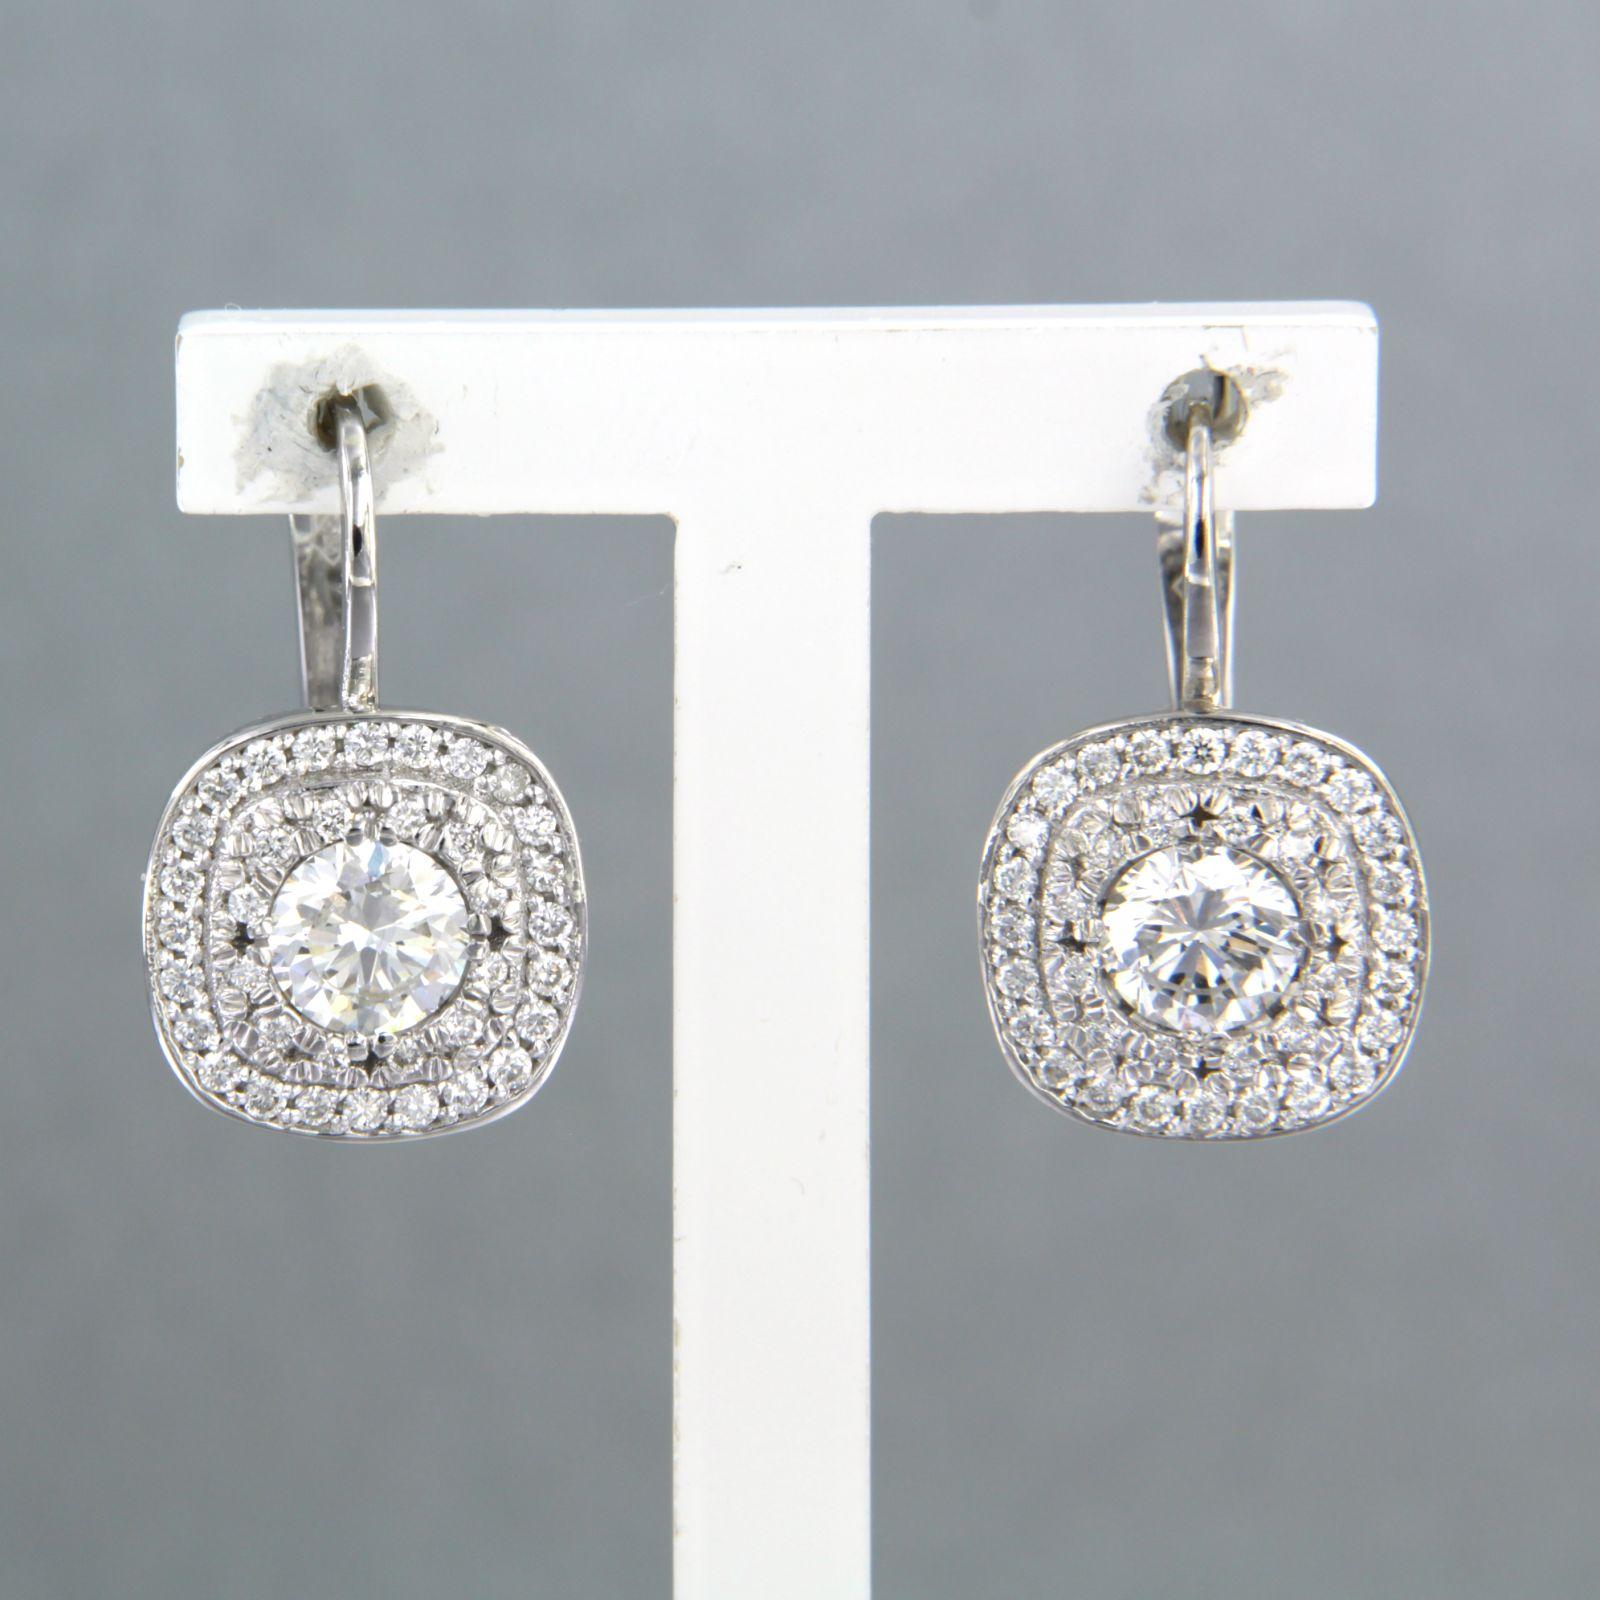 14 kt white gold earrings set with brilliant cut diamond 0.49 ct D-SI1; 0.50ct E-VVS1 ; 0.30 ct E/F-VS-SI

detailed description

The size of the earrings is 2.0 cm by 1.1 cm

weight 4.4 grams

Occupied with

- 1 x 5.11-5.16x3.04 mm brilliant cut